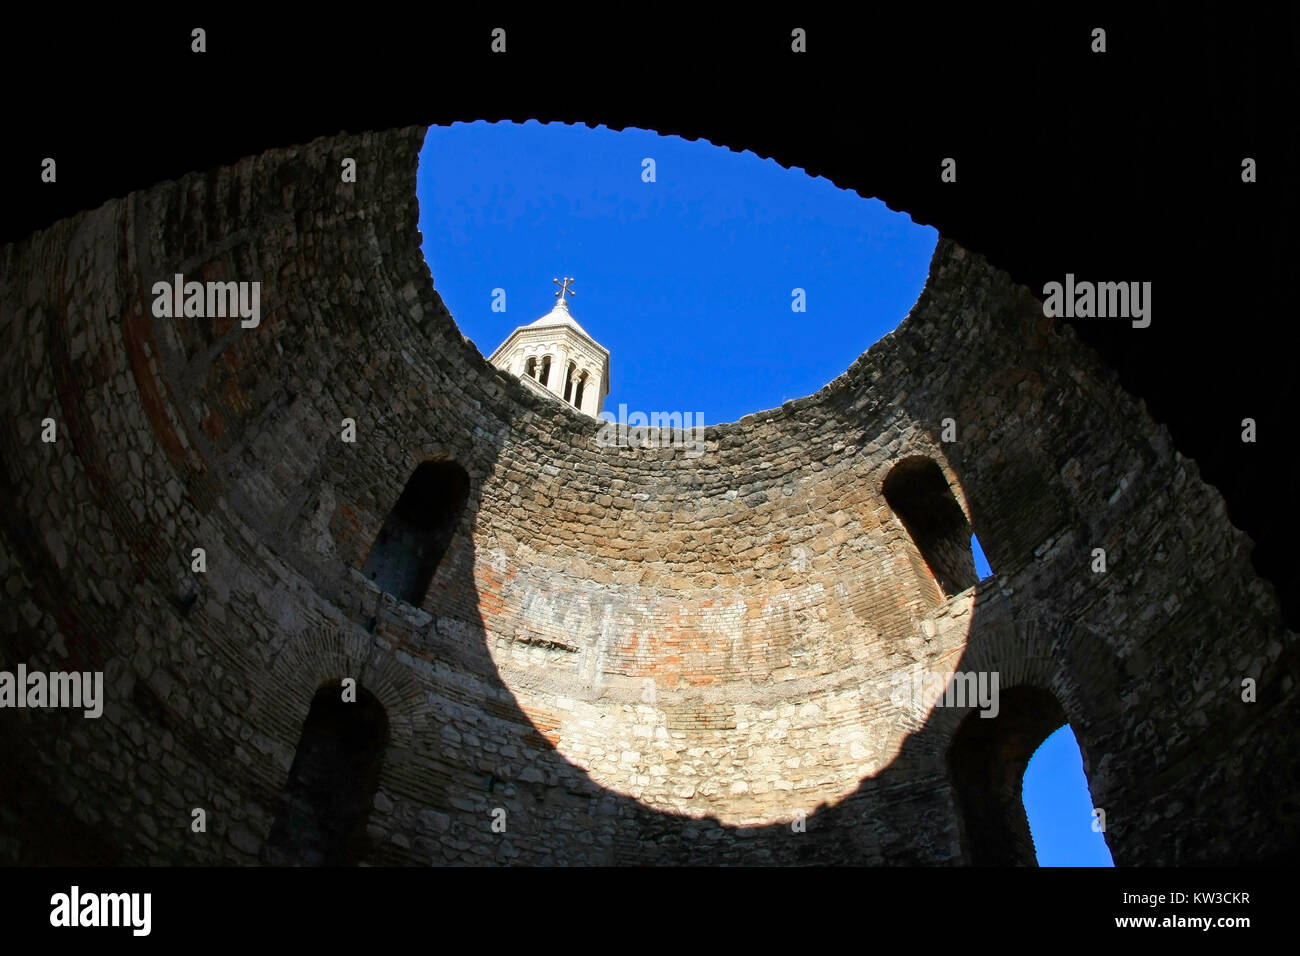 St Dujam belfry viewed through the Vestibul, entrance to the living quarters in palace of the roman emperor Diocletian in Split, Croatia Stock Photo